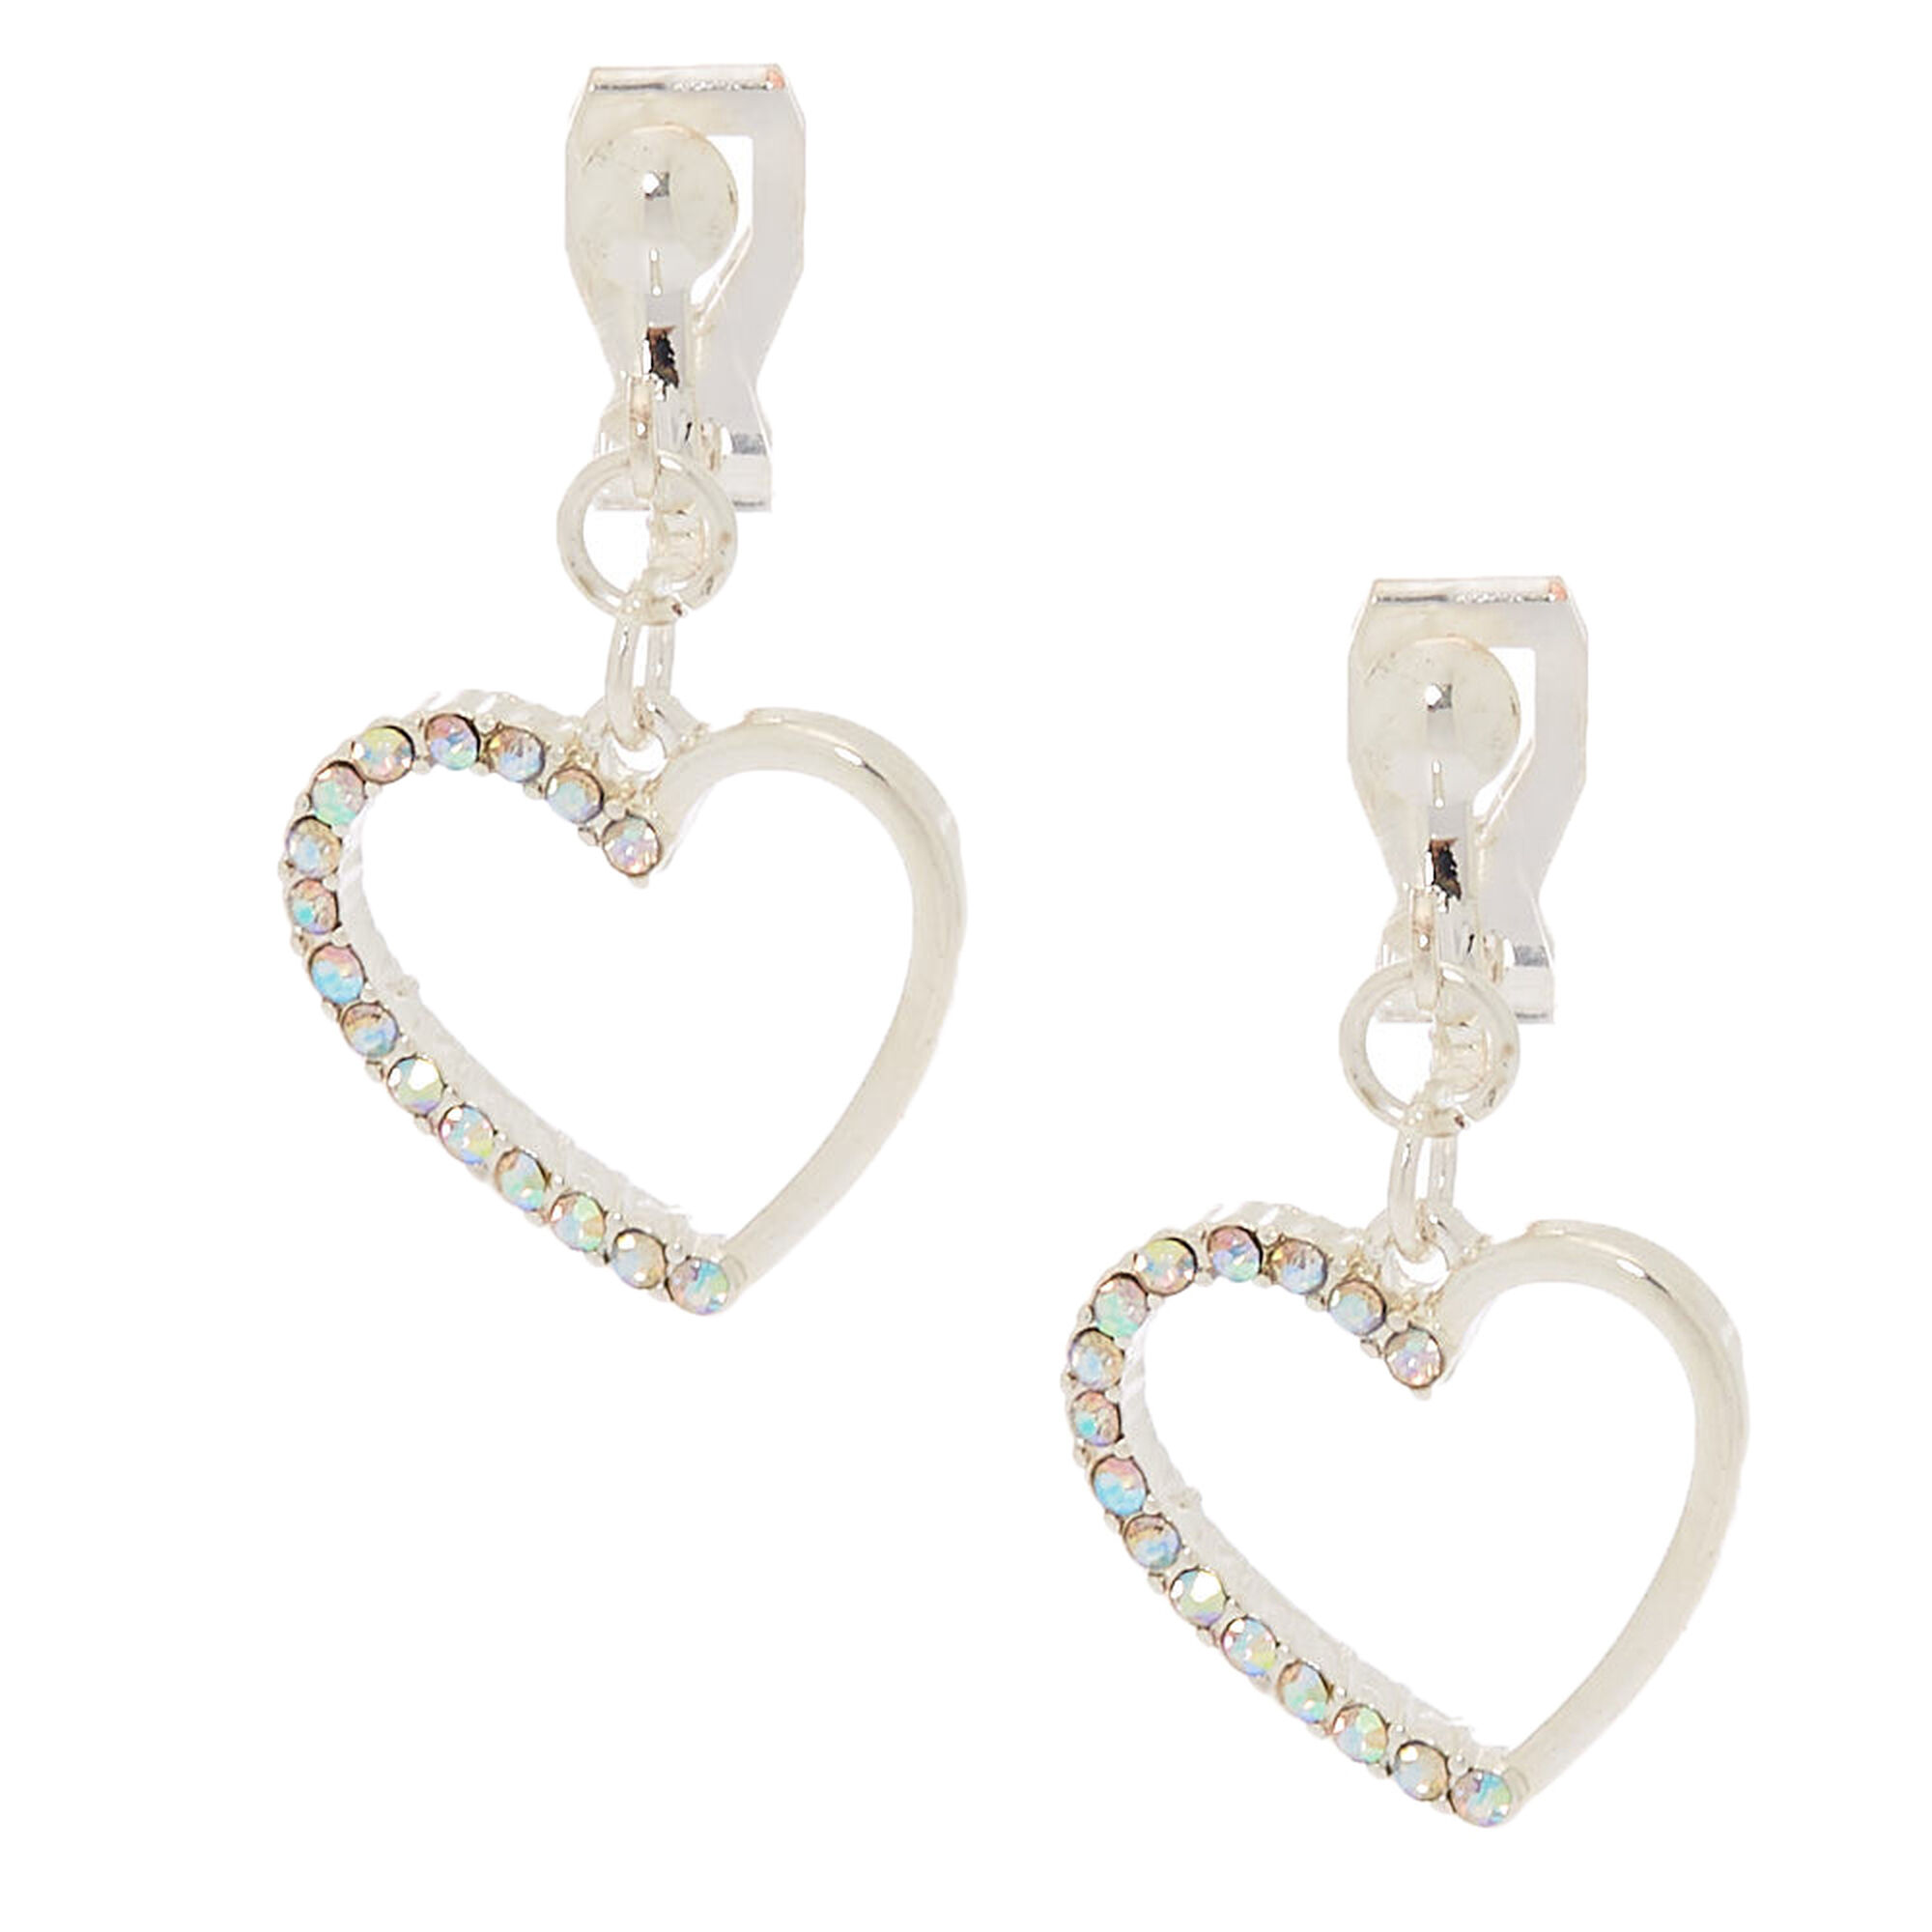 View Claires Tone 1 Heart Clip On Drop Earrings Silver information